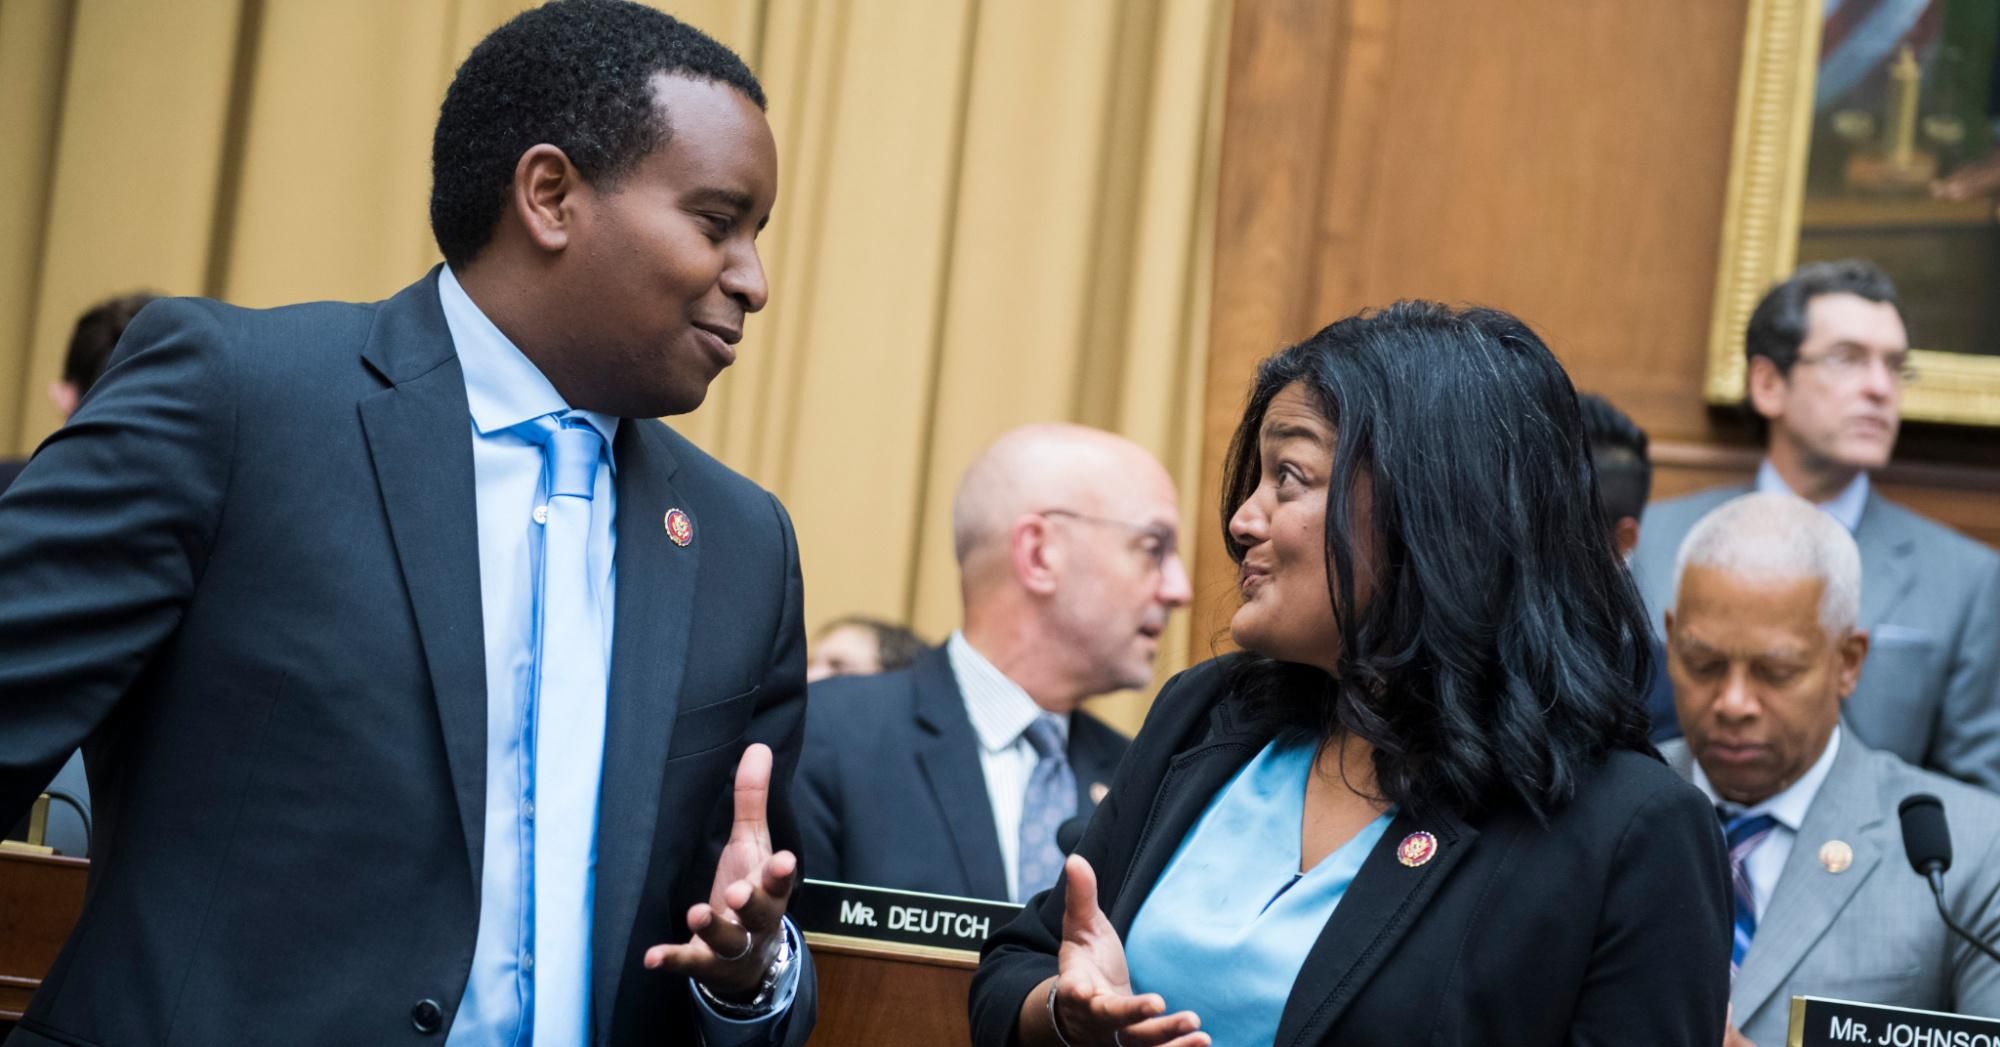 Reps. Joe Neguse (D-Colo.) and Pramila Jayapal (D-Wash.) are seen during a House Judiciary Committee hearing on Thursday, June 20, 2019. (Photo: Tom Williams/CQ Roll Call via Getty Images)